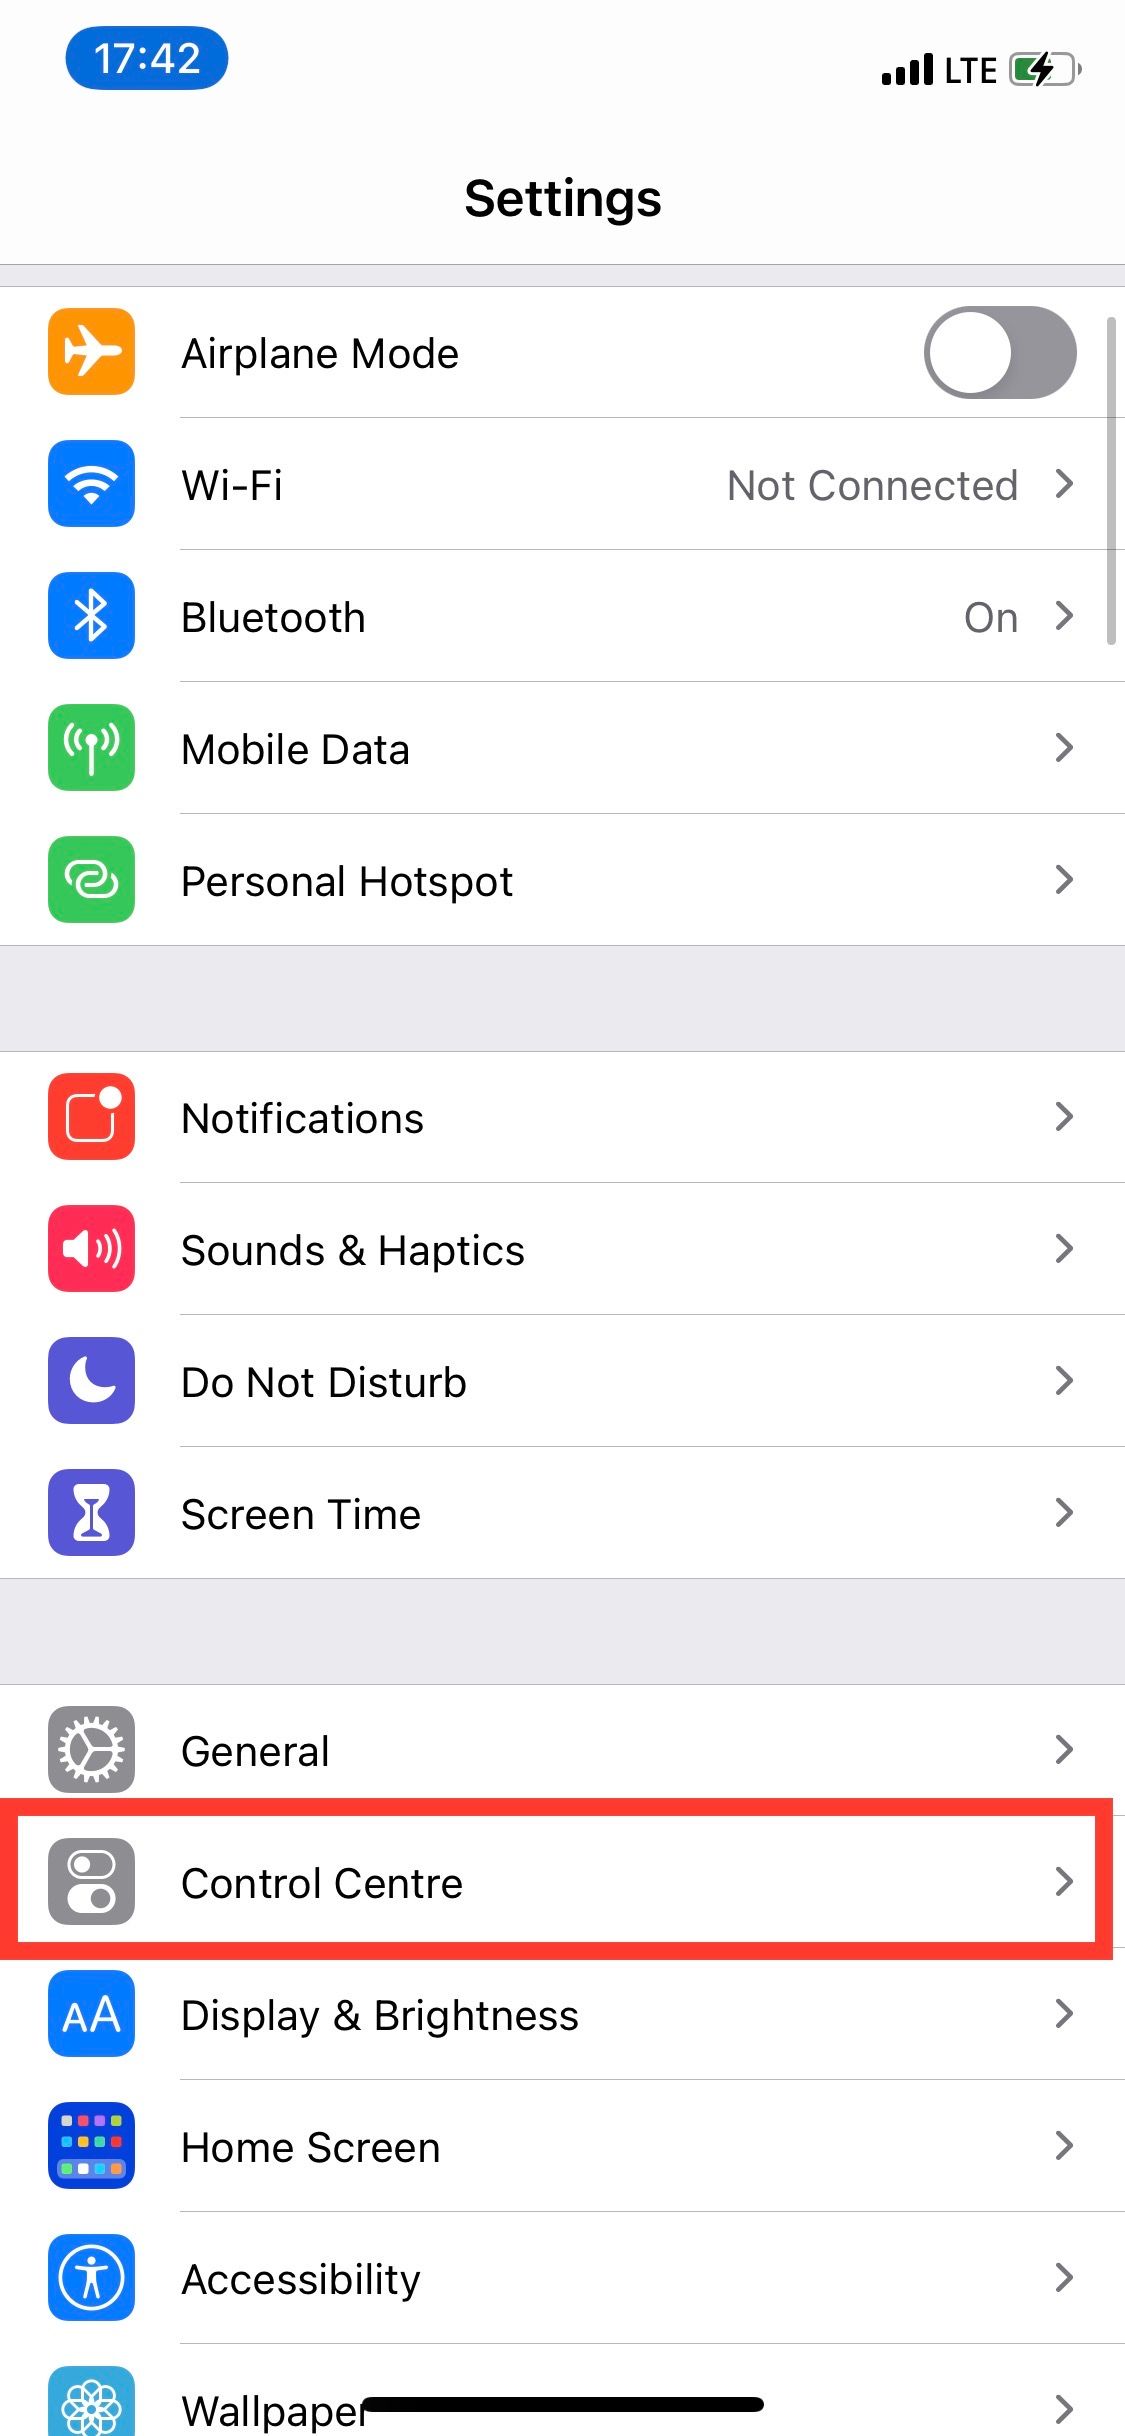 iPhone Settings menu with Control Center highlighted